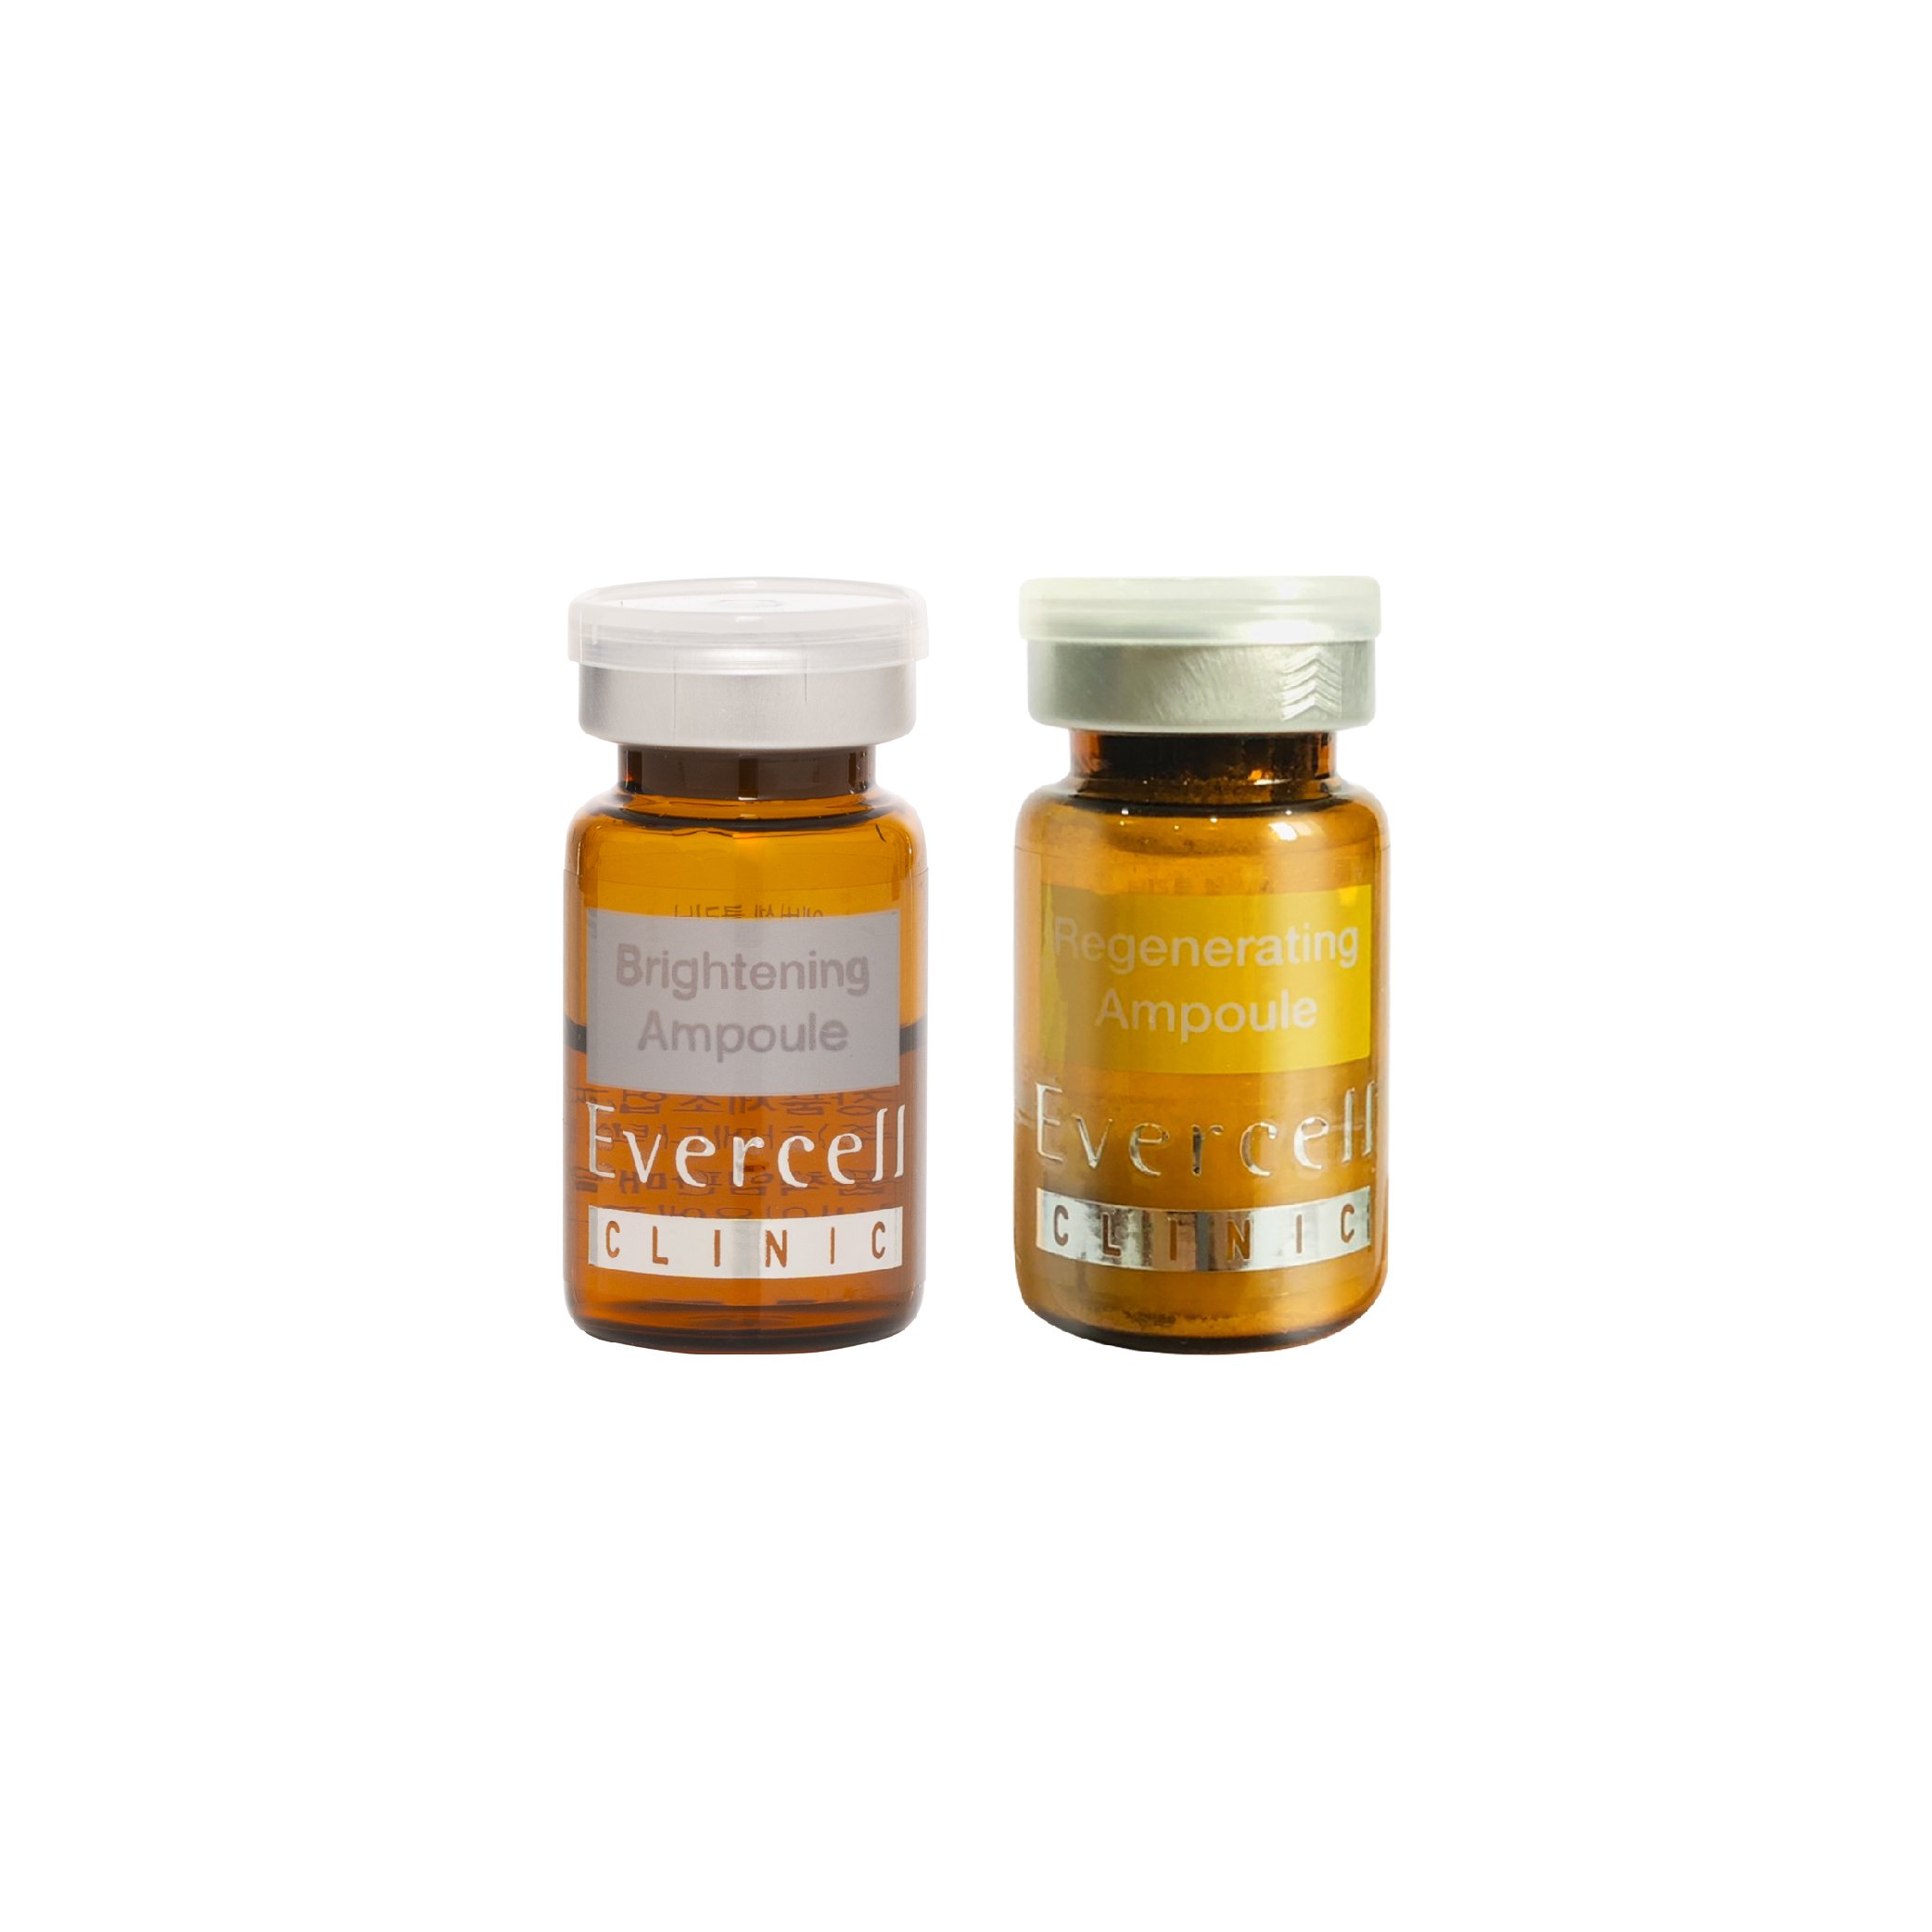 Bộ đôi Evercell Clinic Brightening Ampoule 5 ml / 1 chai +   Evercell Clinic Regenerating Activator 5 ml / 1 chai